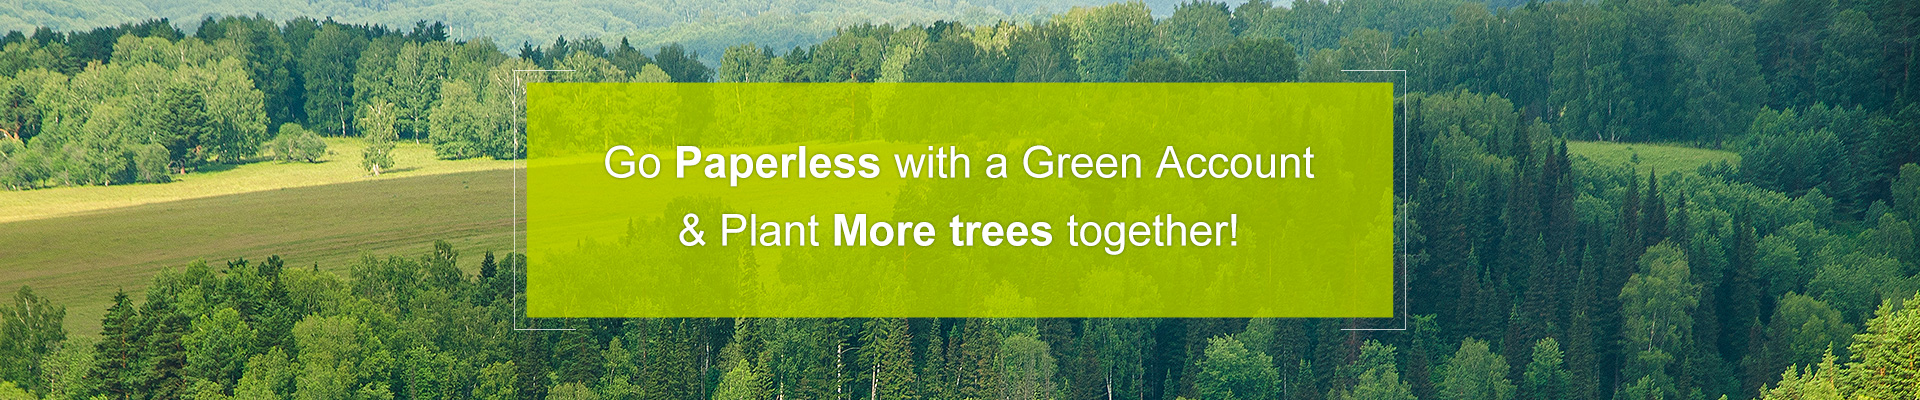 Go Paperless with Green Account & Plant More trees together！